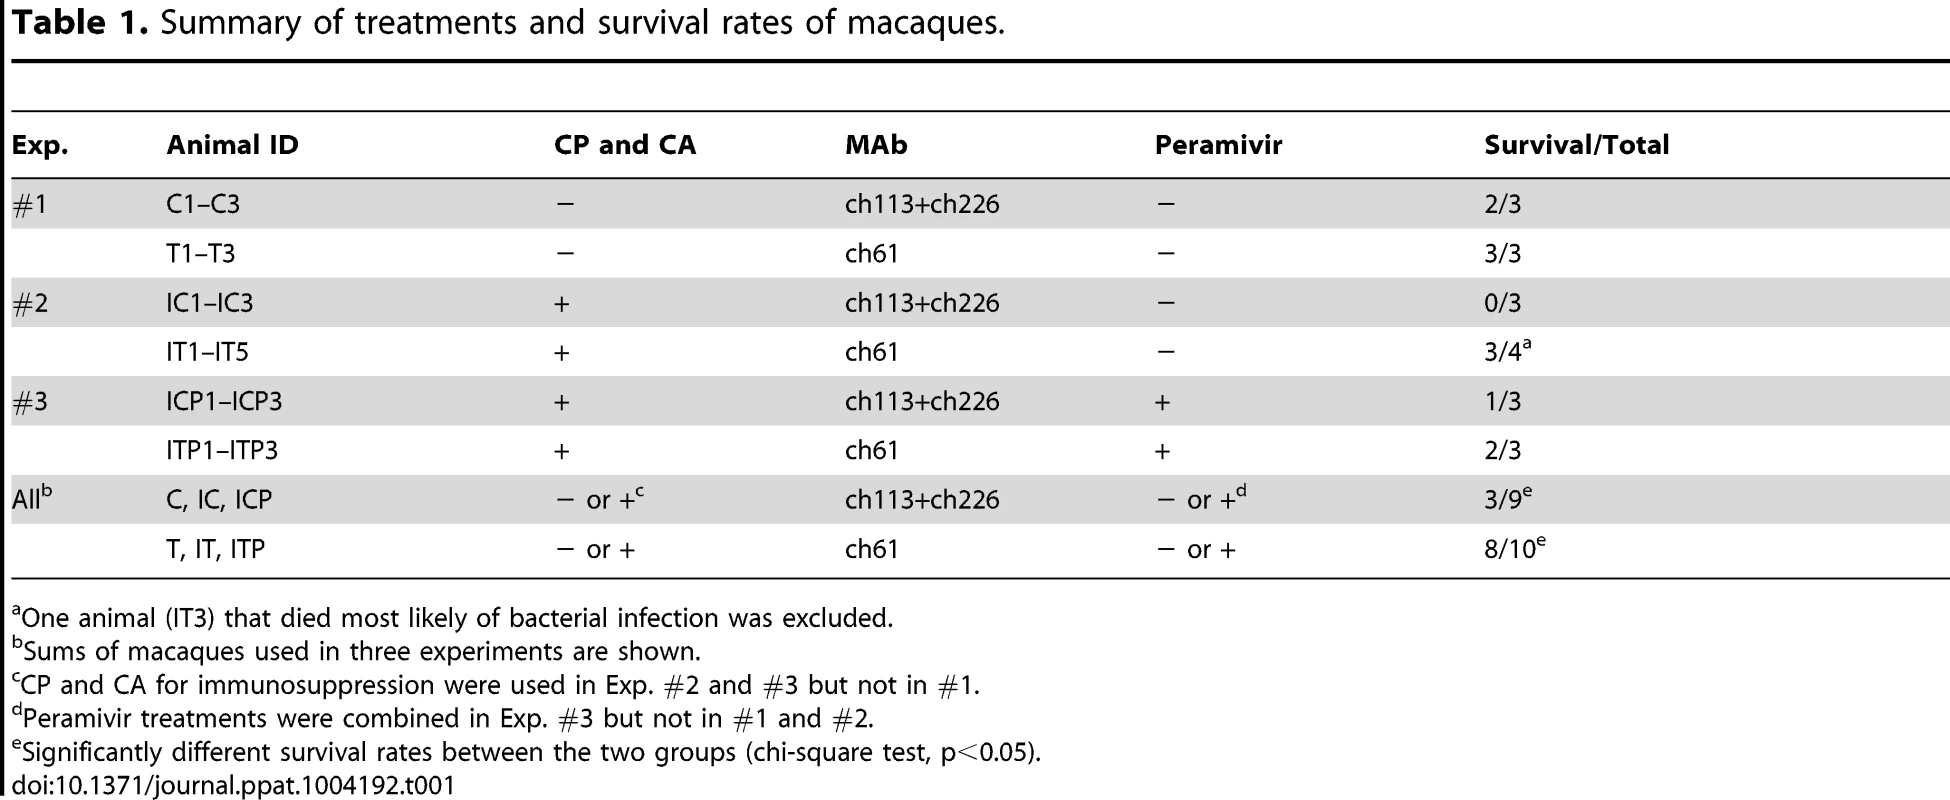 Summary of treatments and survival rates of macaques.